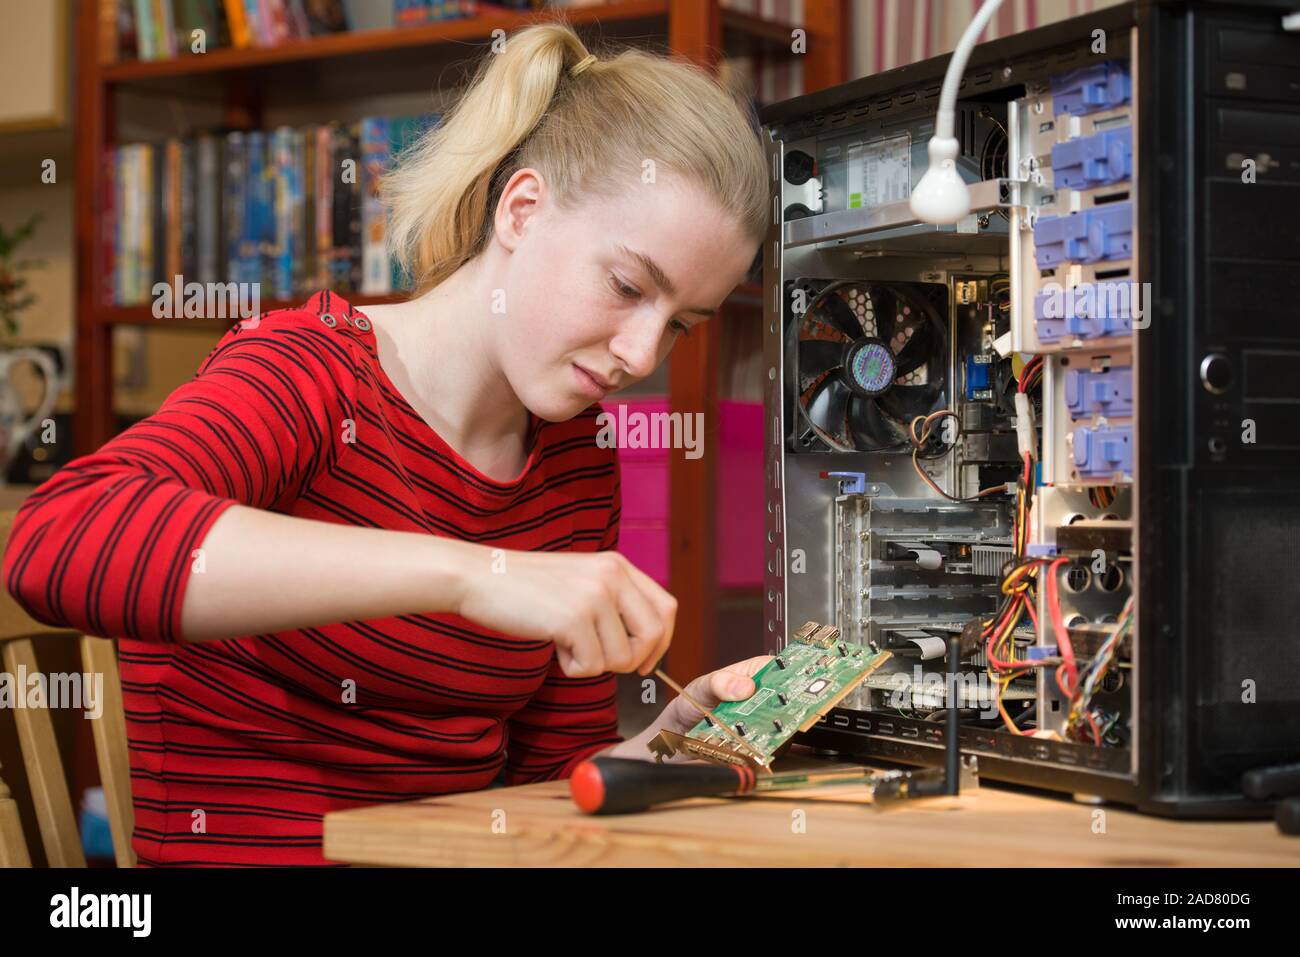 Teenage girl using a screwdriver on an expansion card printed circuit board from an open PC while making repairs to the computer. Stock Photo